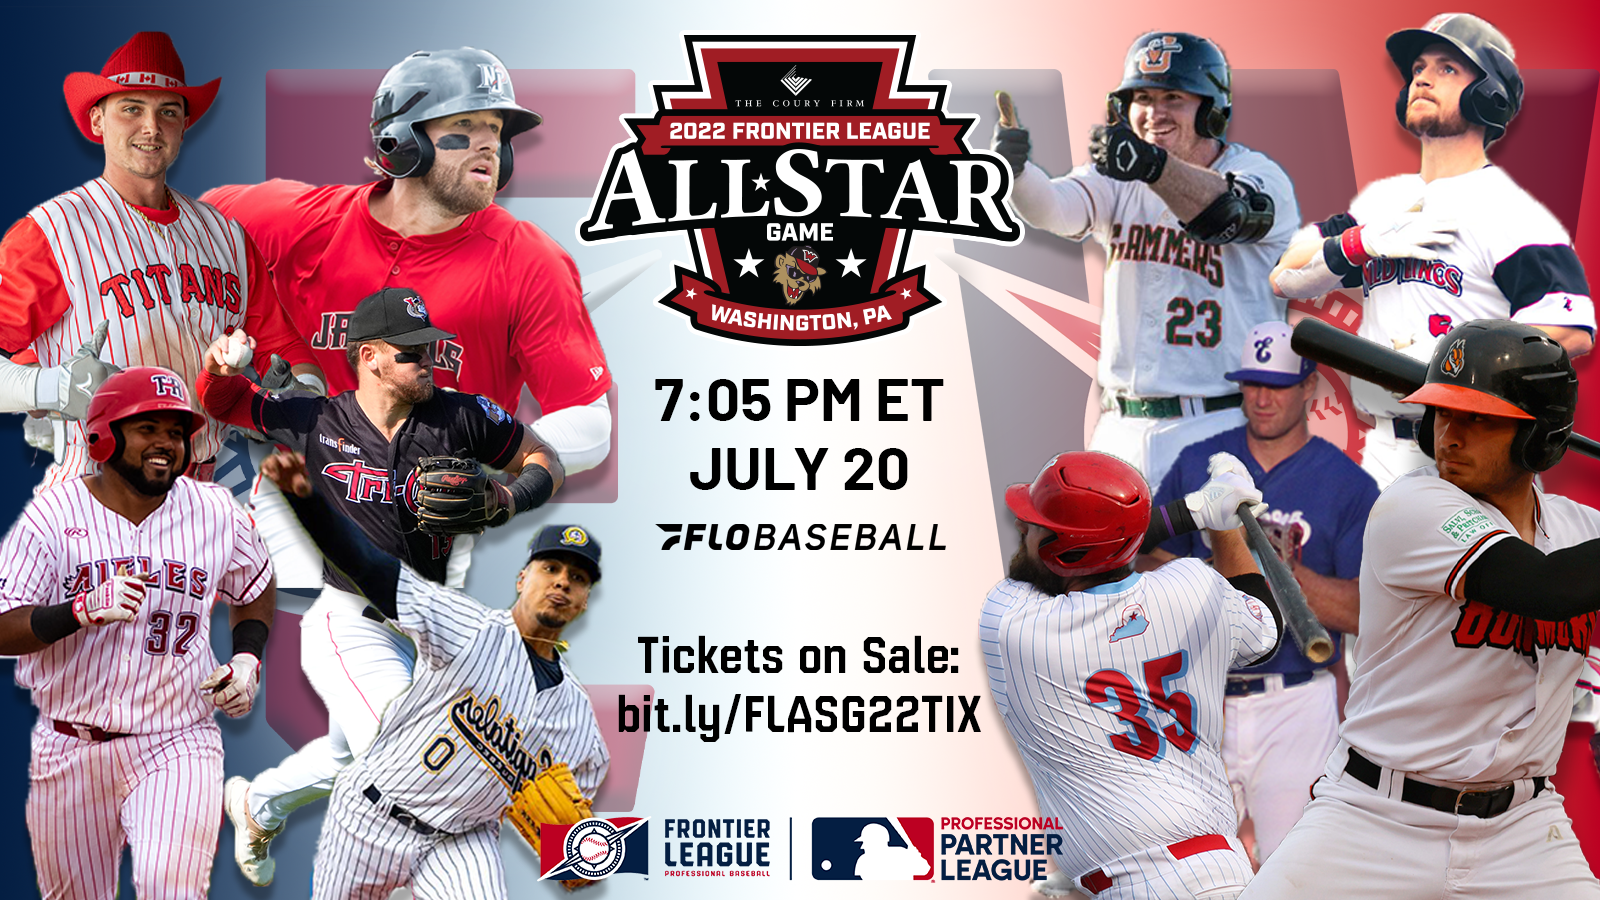 FRONTIER LEAGUE 2022 ALL-STAR ROSTERS ANNOUNCED